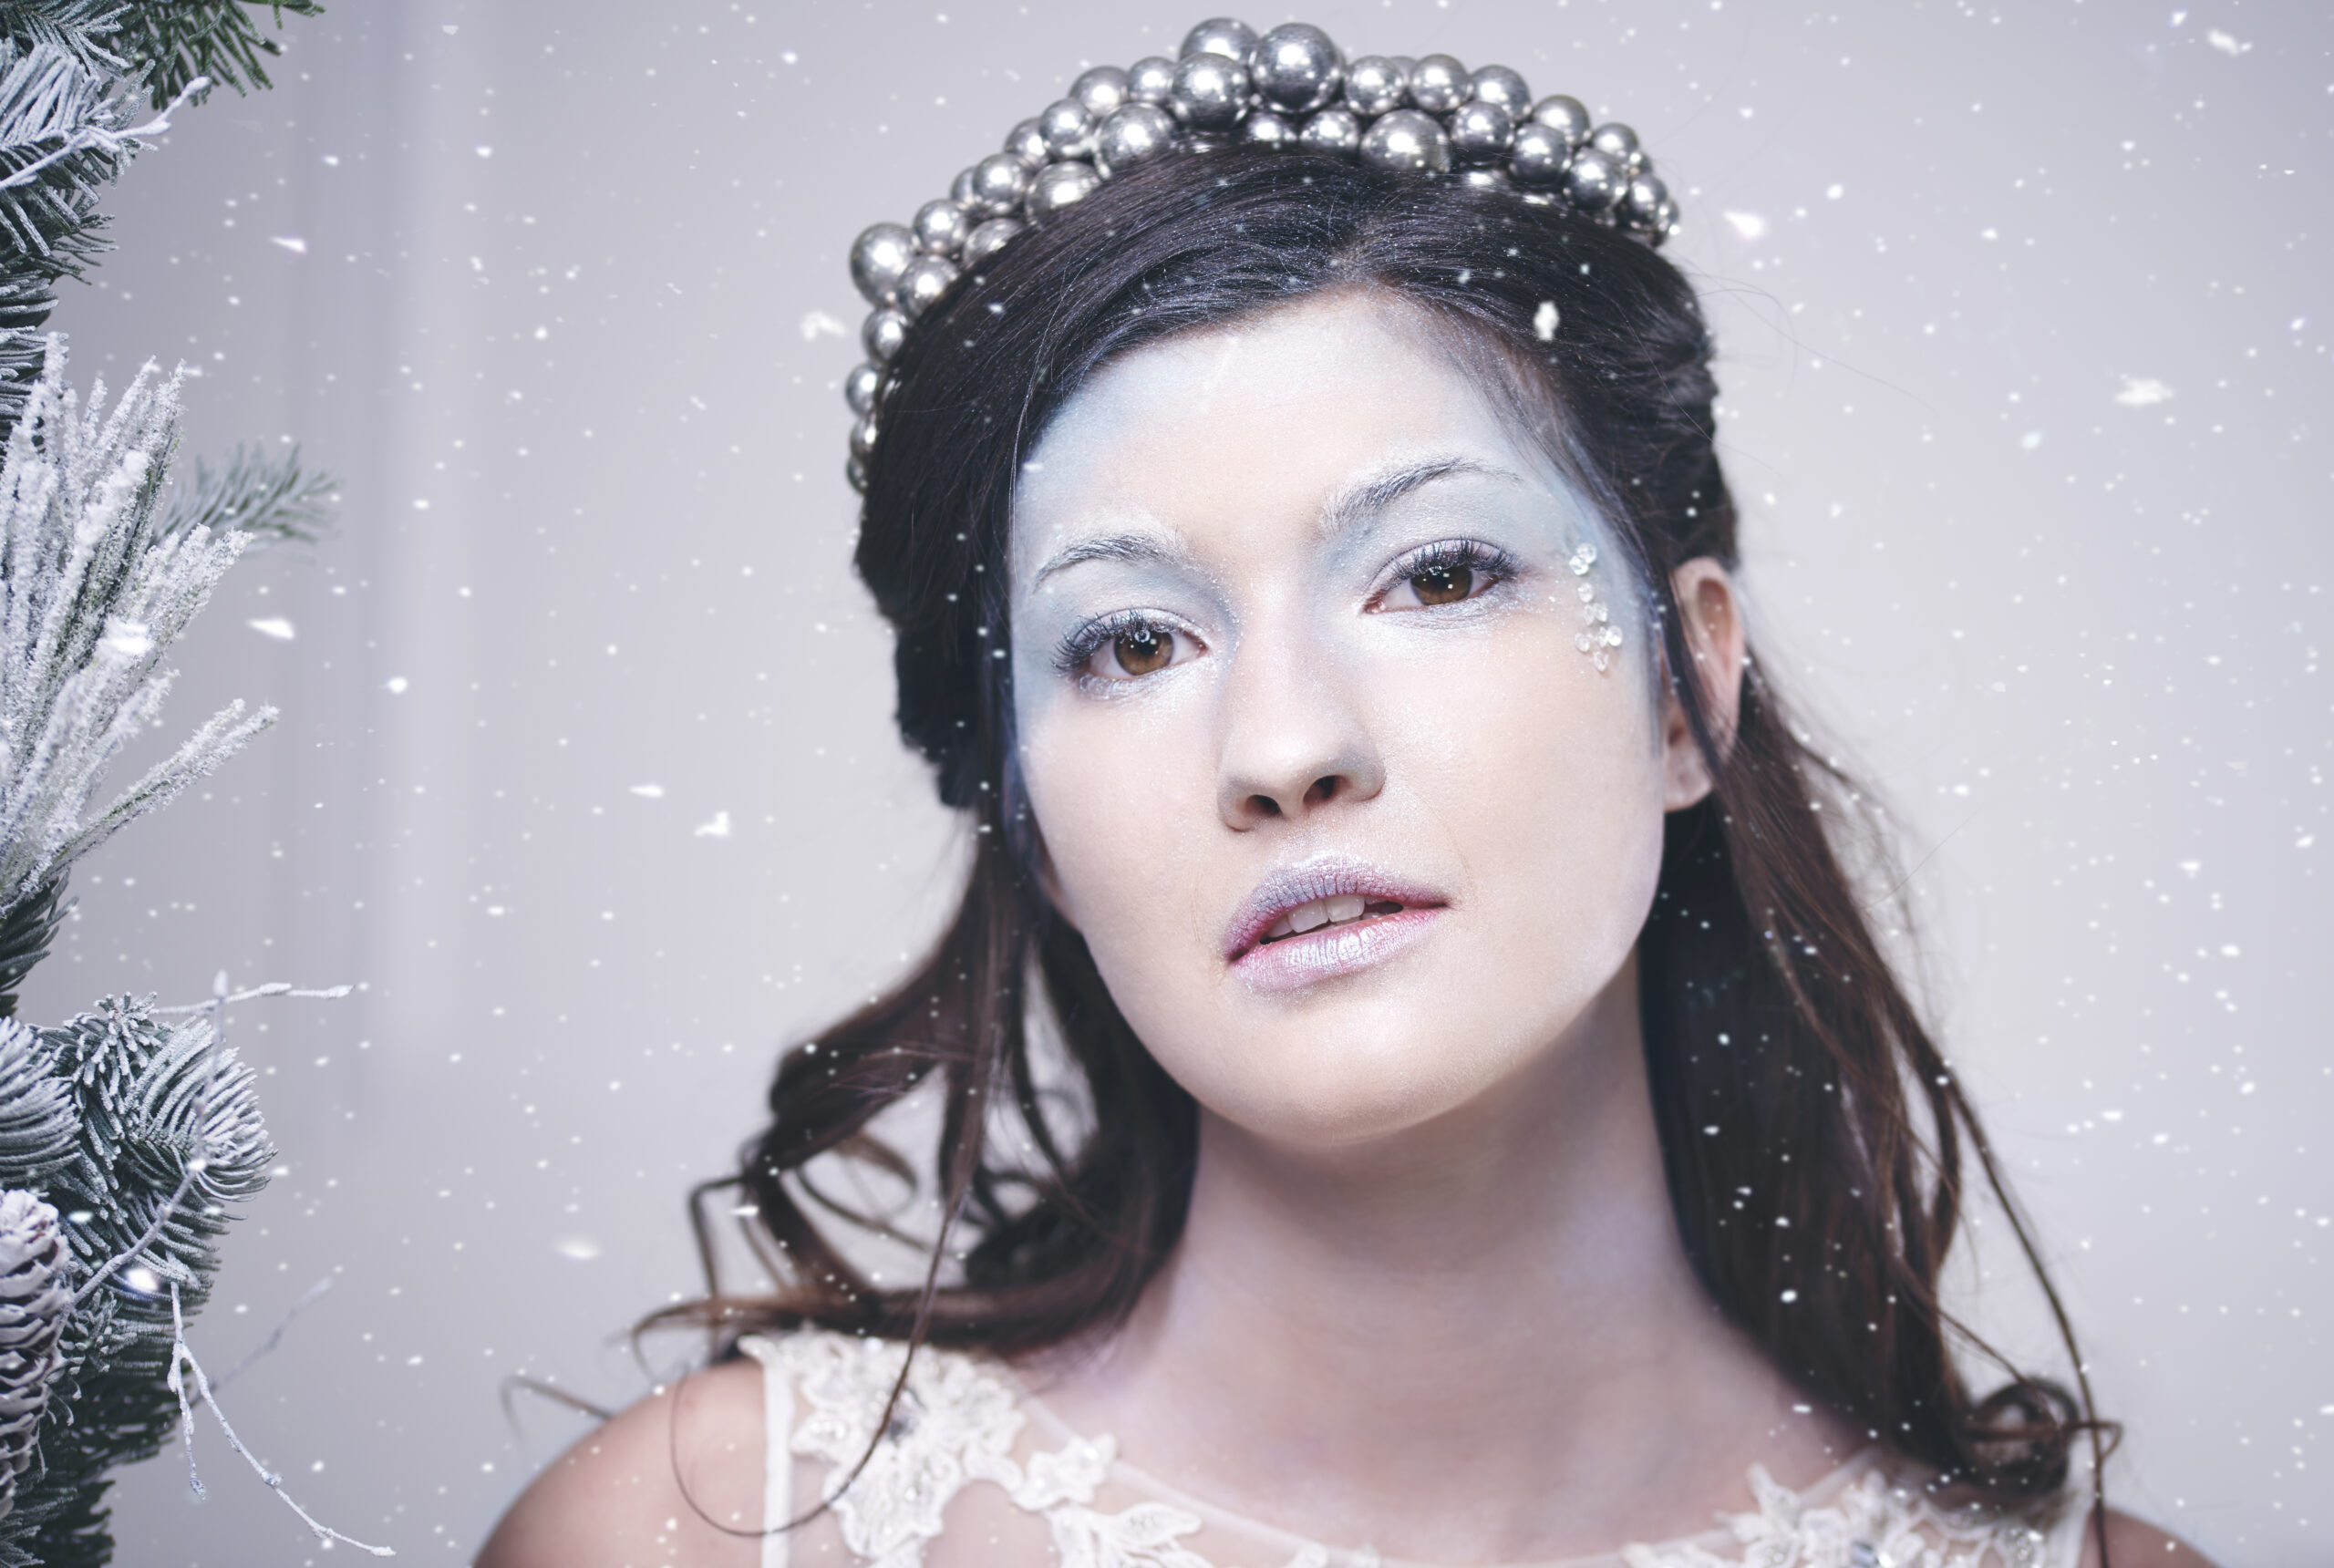 Portrait of beautiful snow queen among falling snow